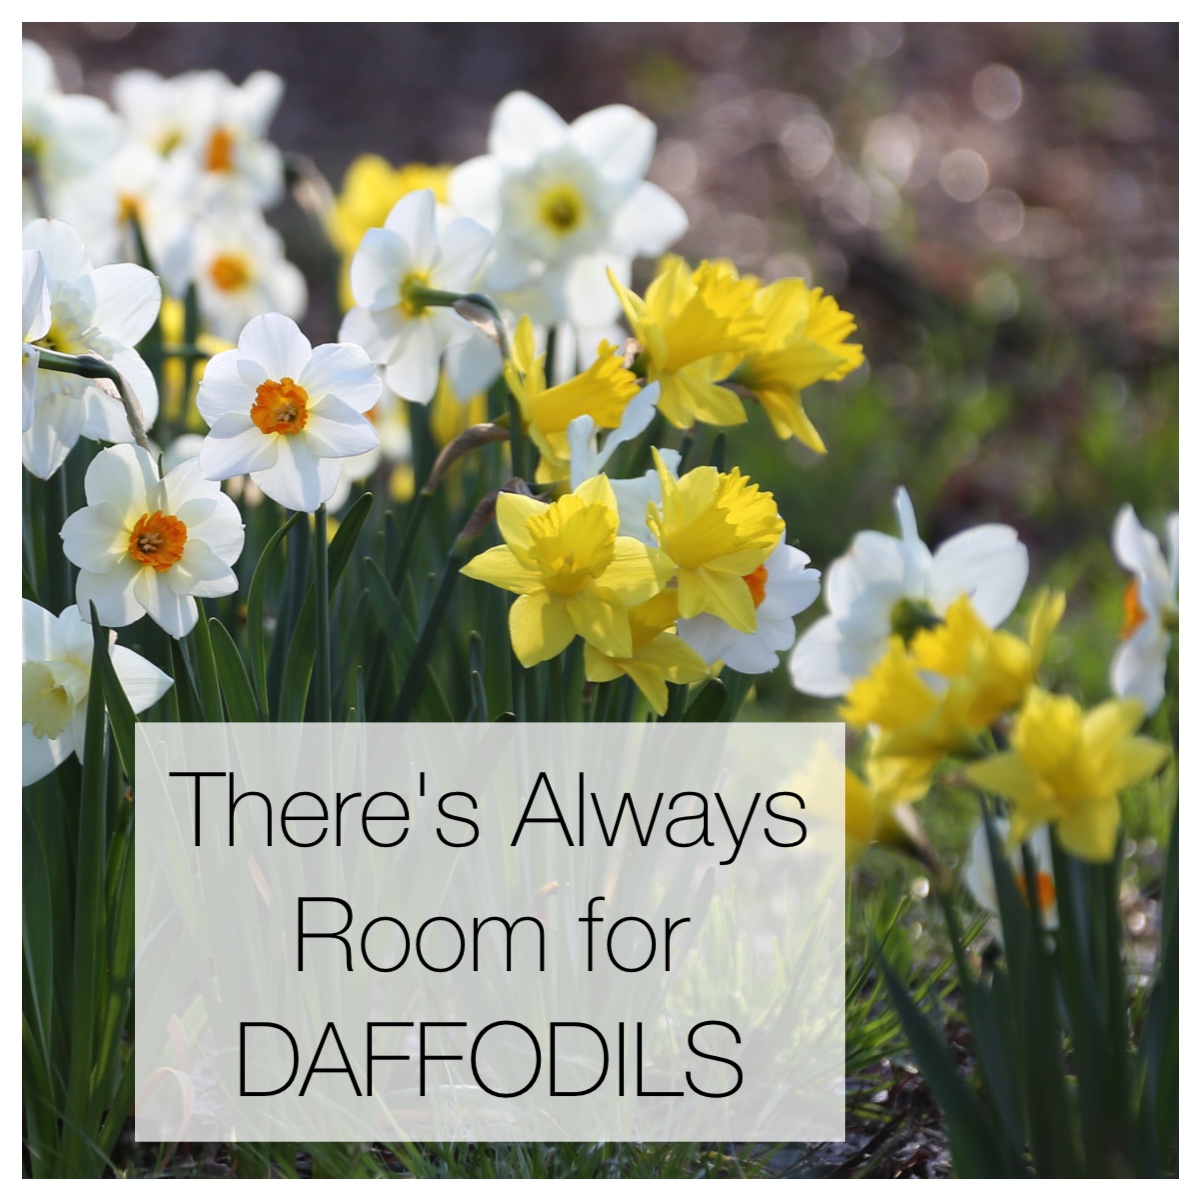 There's Always Room for Daffodils